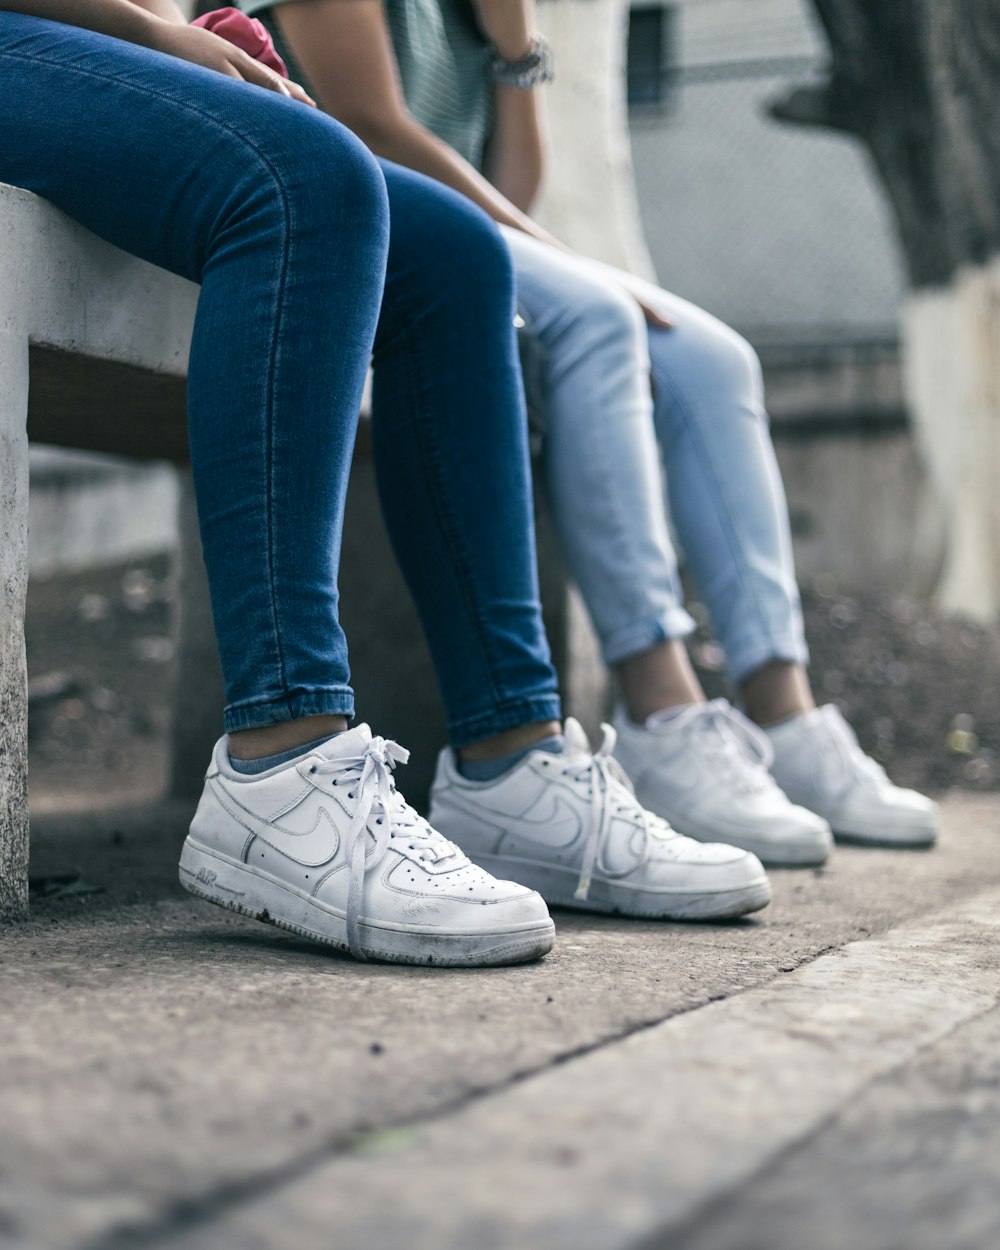 Person in blue denim jeans and white nike sneakers sitting on concrete  bench photo – Free Guerrero Image on Unsplash